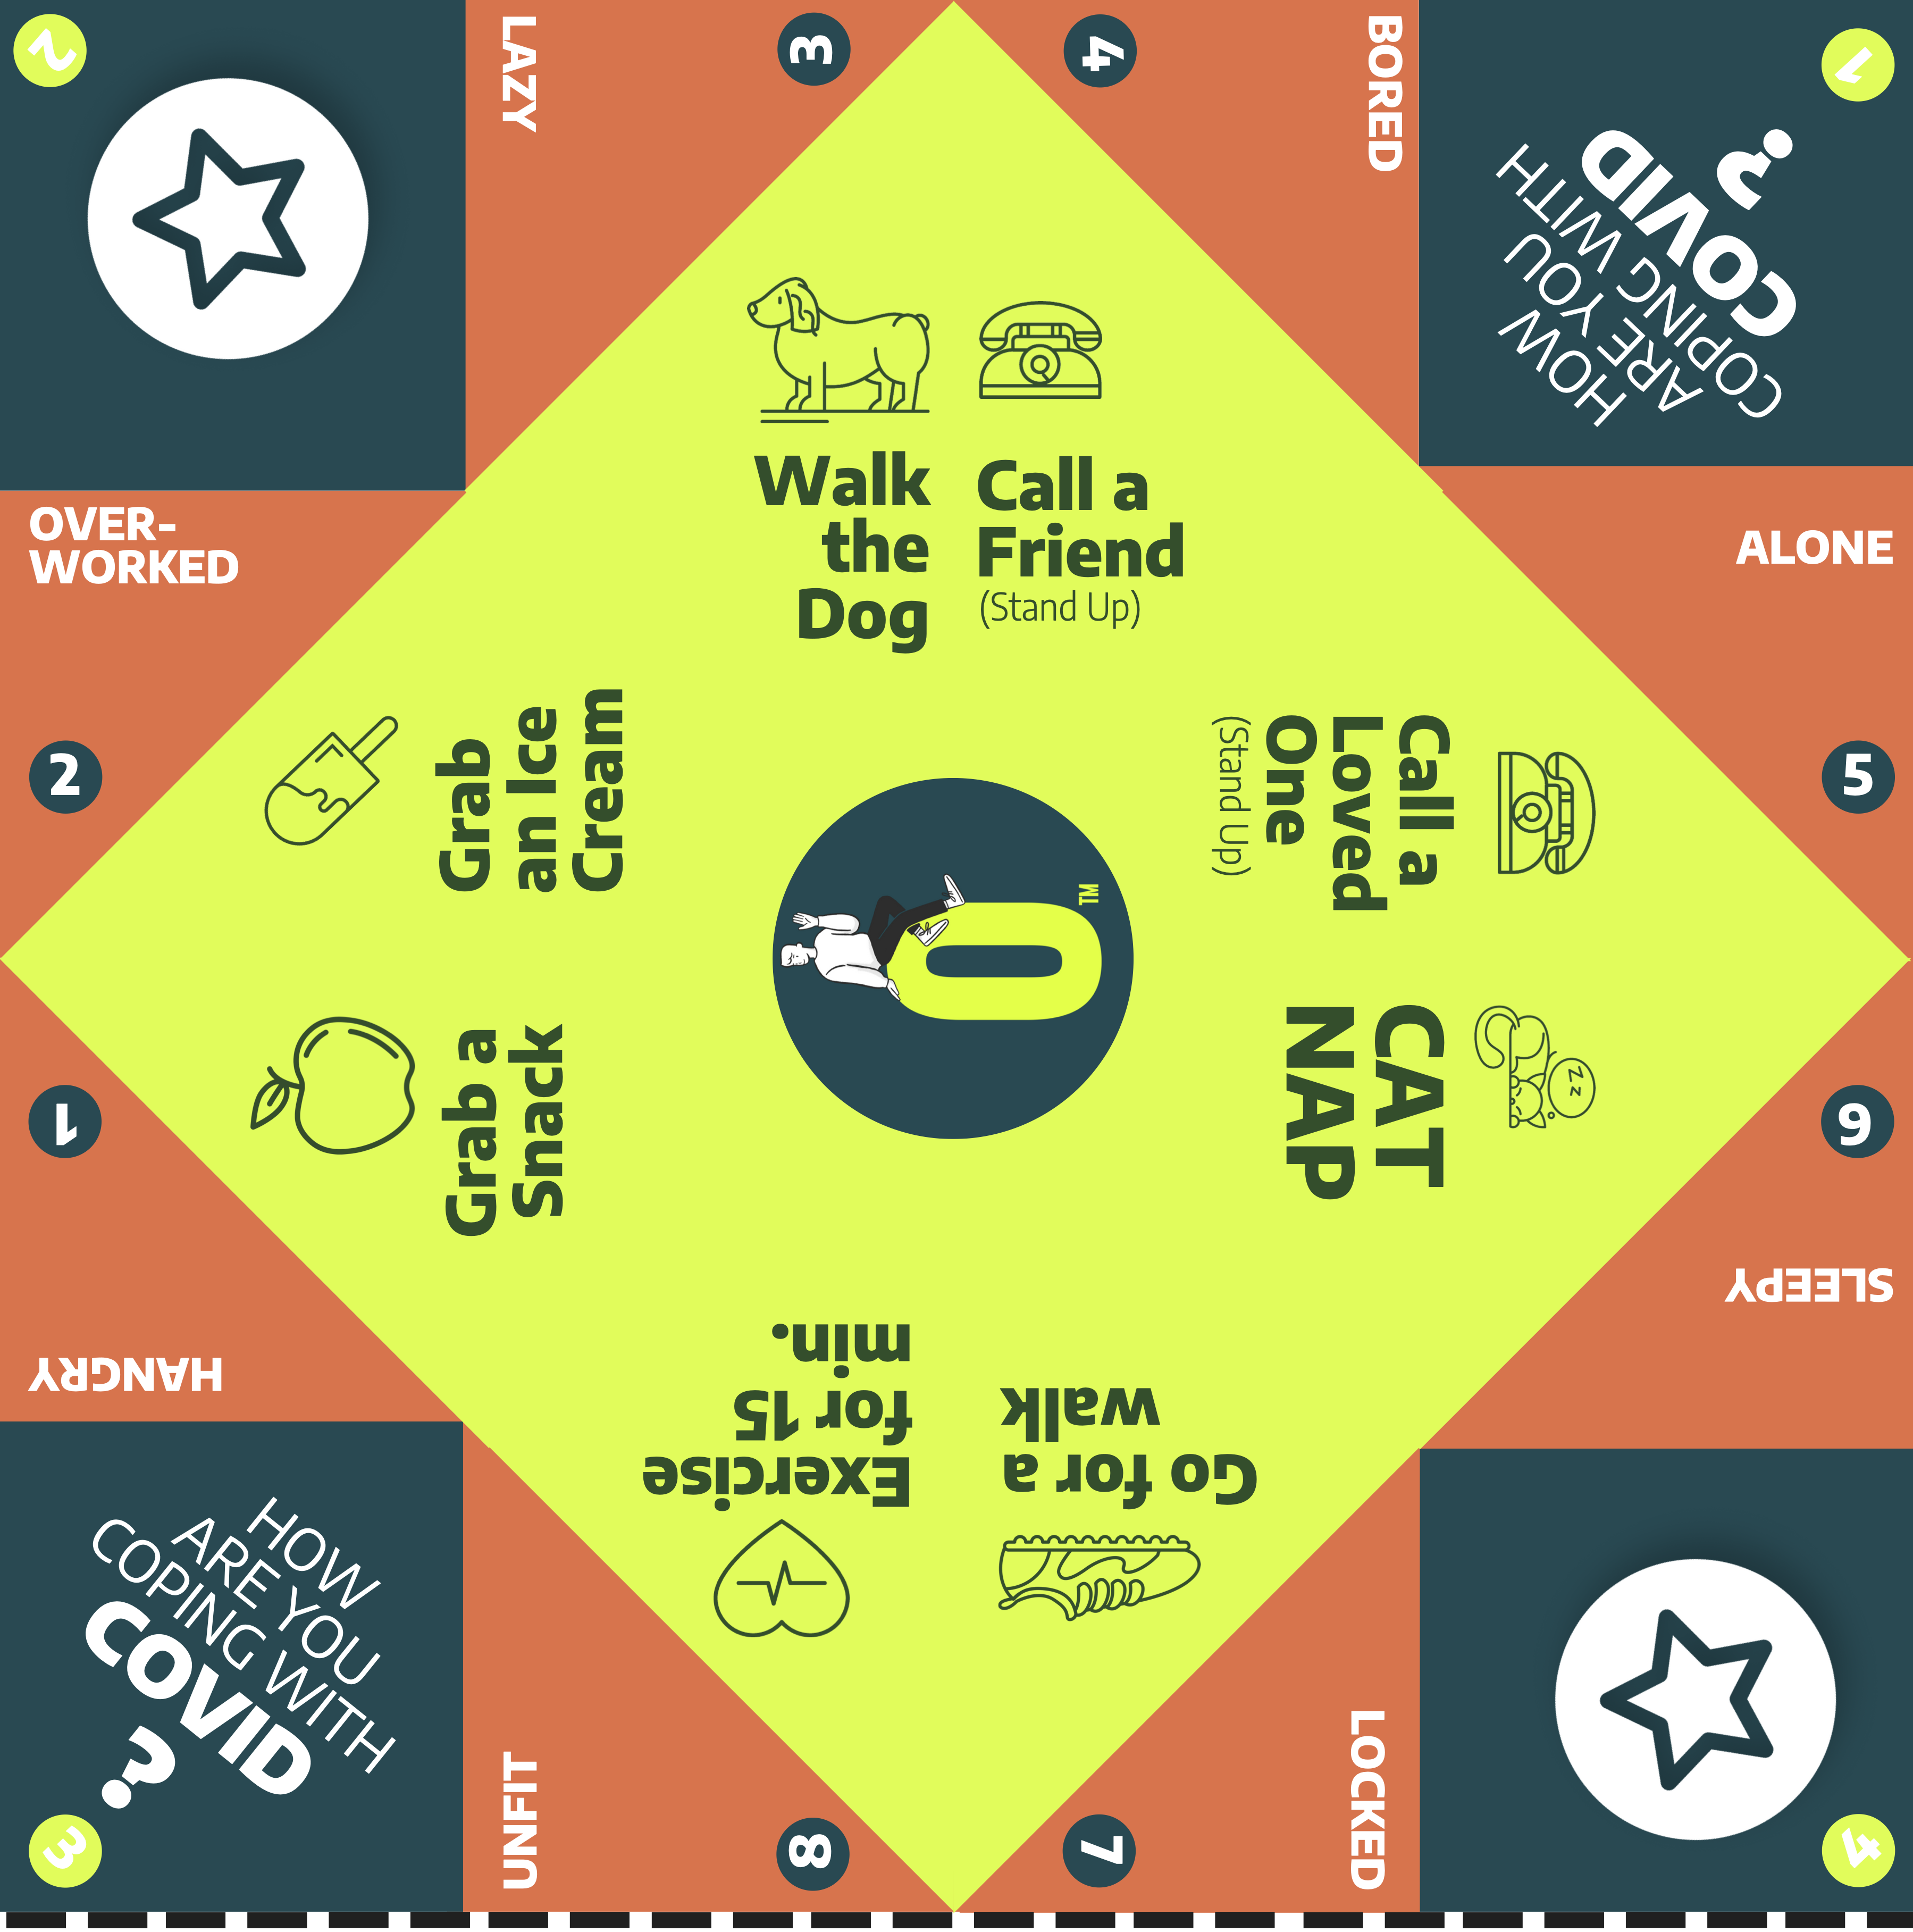 Img 5 1 | How To Work Well And Be Well – Our Free Covid Fortune Teller Game Reveals All!